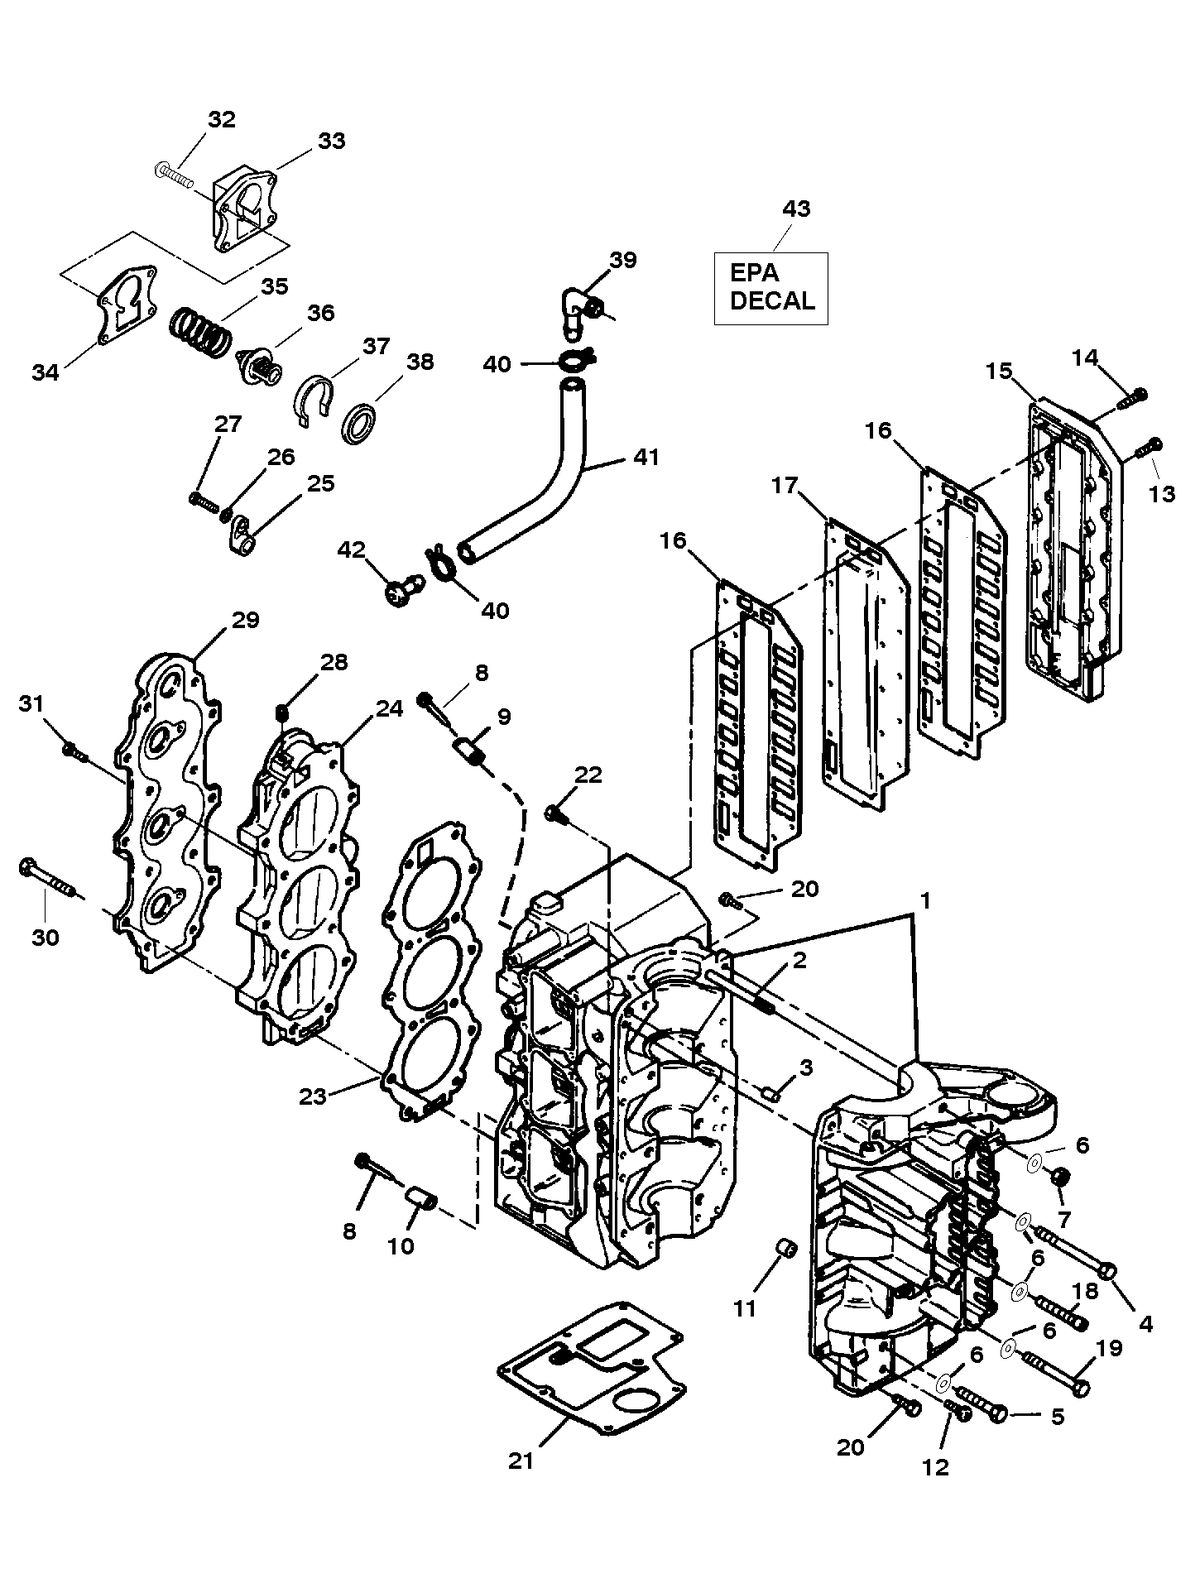 FORCE FORCE 75 H.P. (1998) CYLINDER BLOCK ASSEMBLY